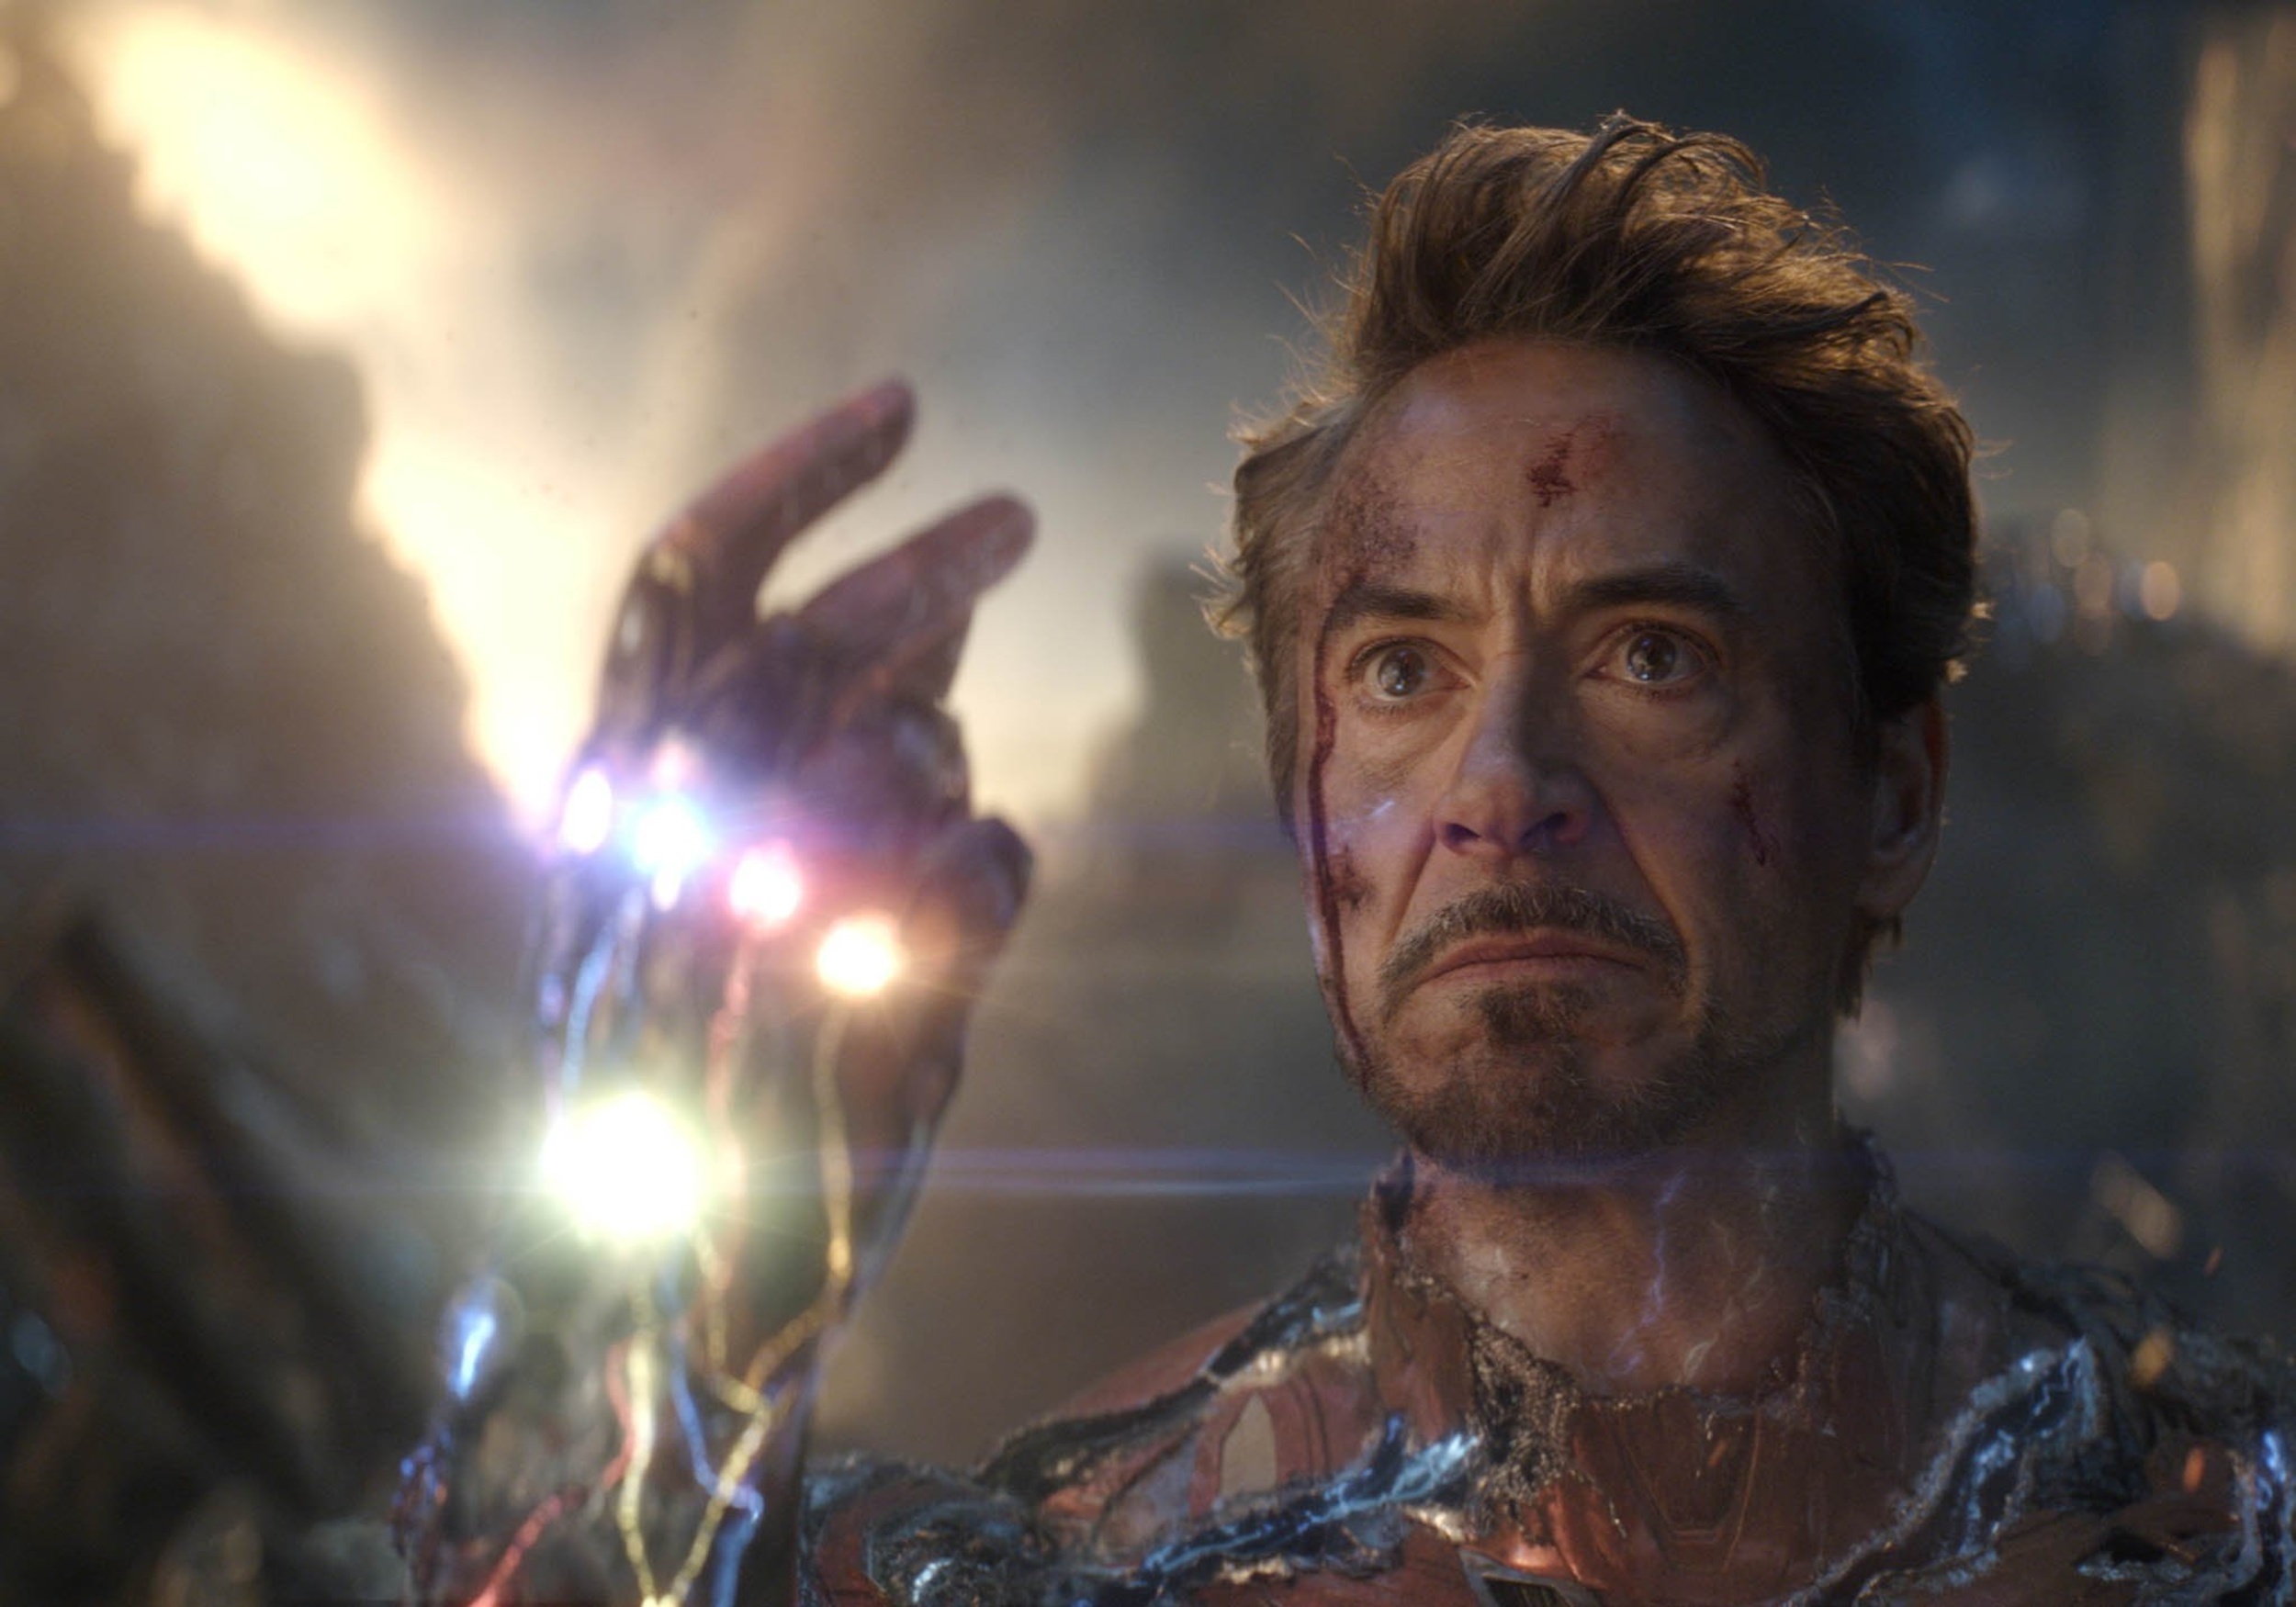 <p>Marvel scripts are closely guarded secrets, especially after actors like Tom Holland and Mark Ruffalo started letting spoilers leak in interviews. In fact, only one actor received the entire screenplay for <em>Endgame</em>. That would be Robert Downey Jr., who arguably needed it to bring Tony Stark and Iron Man to life one last time.</p><p>You may also like: <a href='https://www.yardbarker.com/entertainment/articles/the_25_most_insufferable_characters_in_film_history/s1__29808299'>The 25 most insufferable characters in film history</a></p>